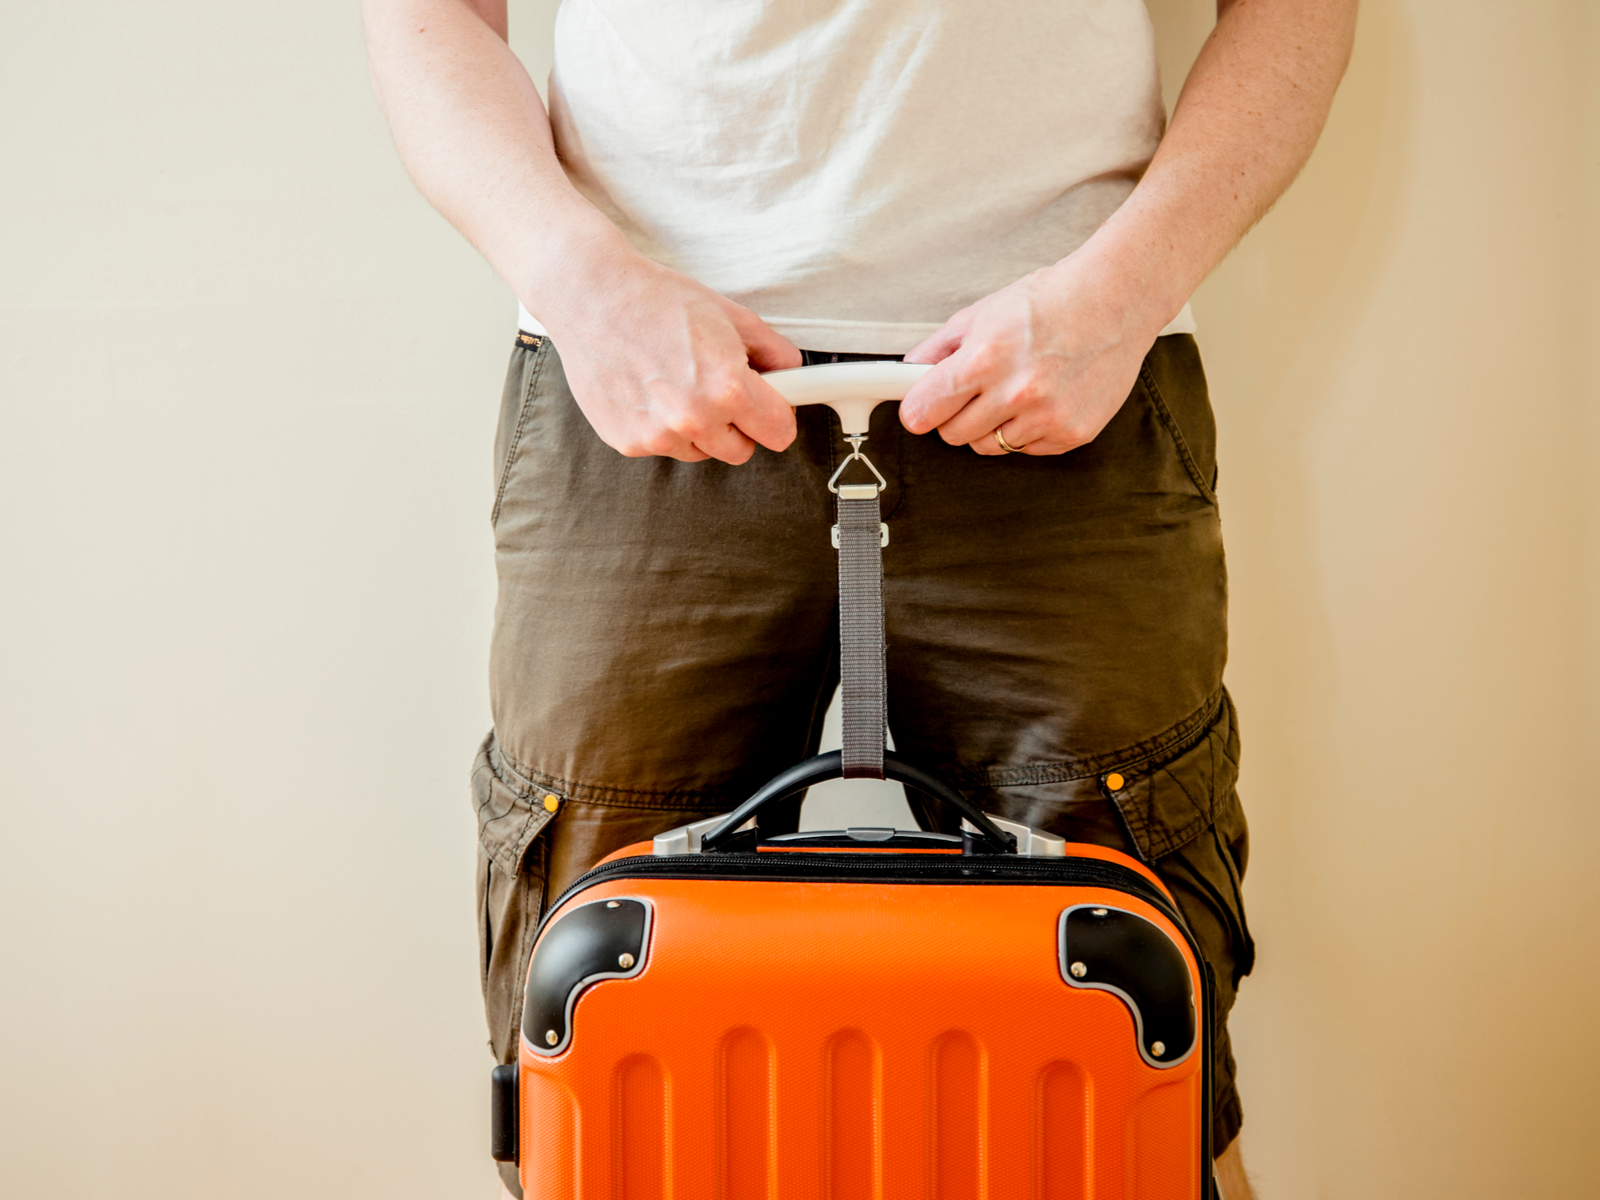 Person holding an orange piece of luggage that's hanging from one of the best luggage scales in a beige room while wearing hiking pants